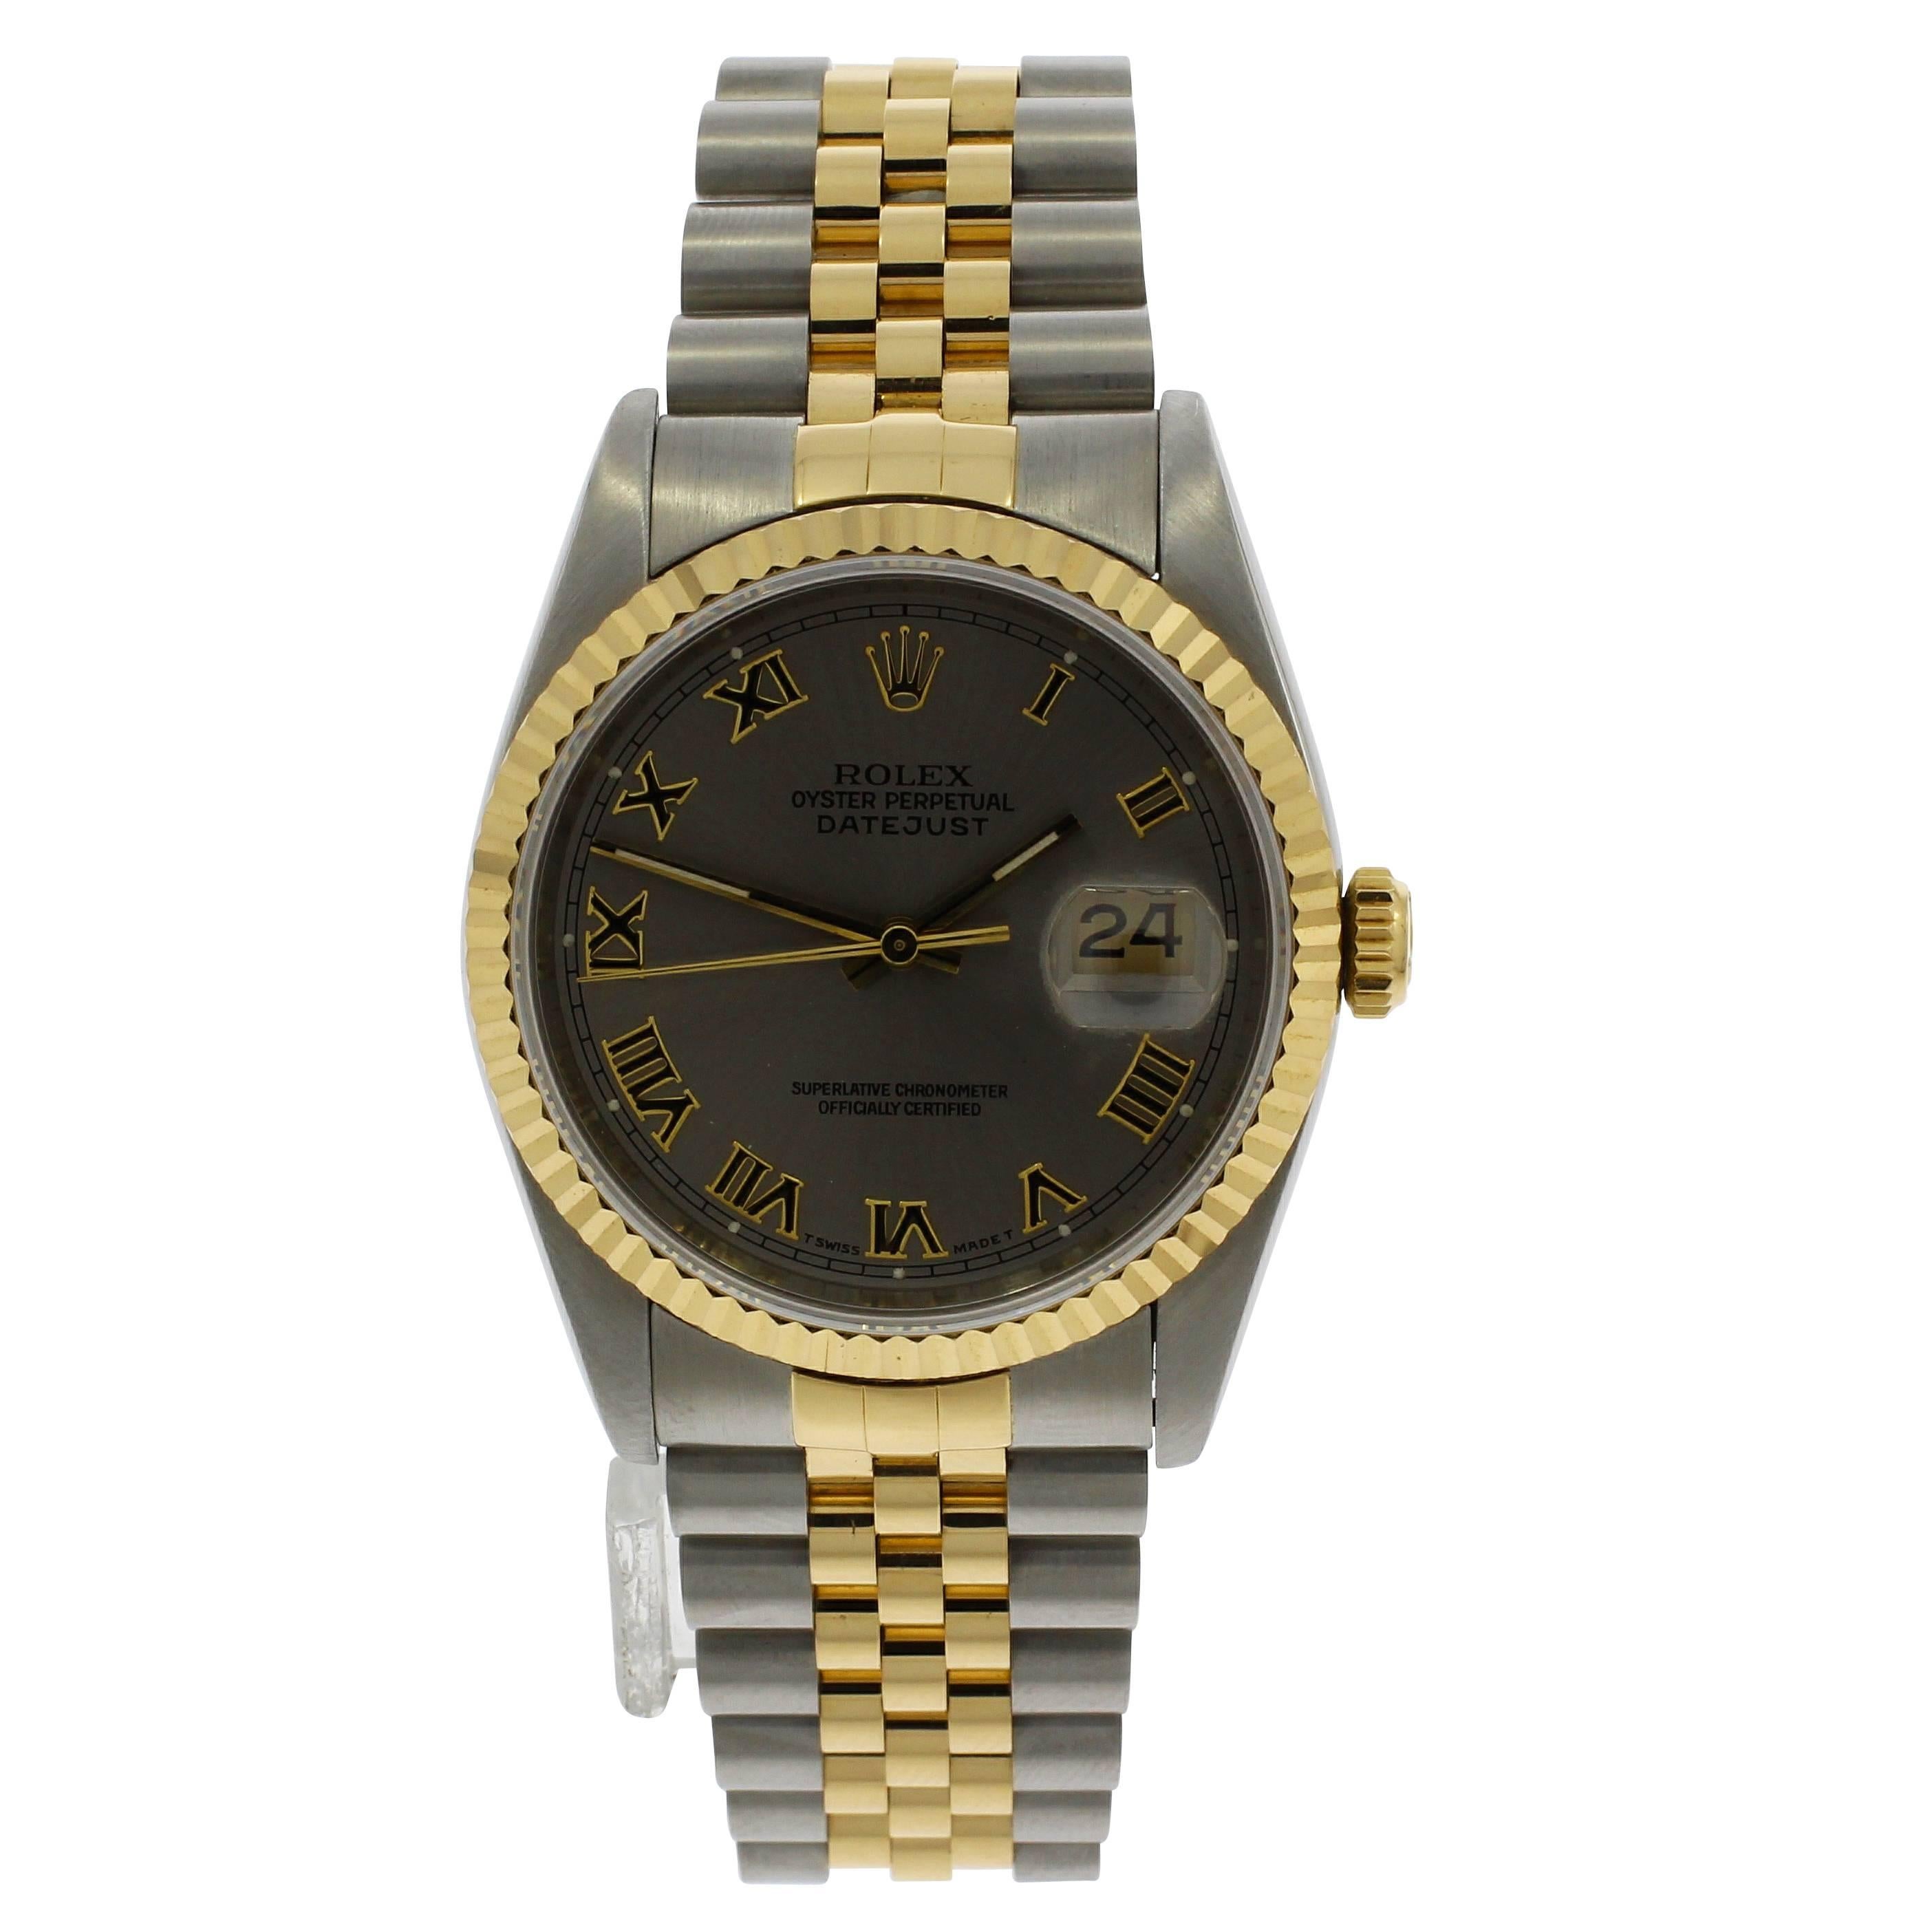 Rolex Yellow Gold Stainless Steel Datejust Wristwatch Ref 16233, 1990 For Sale